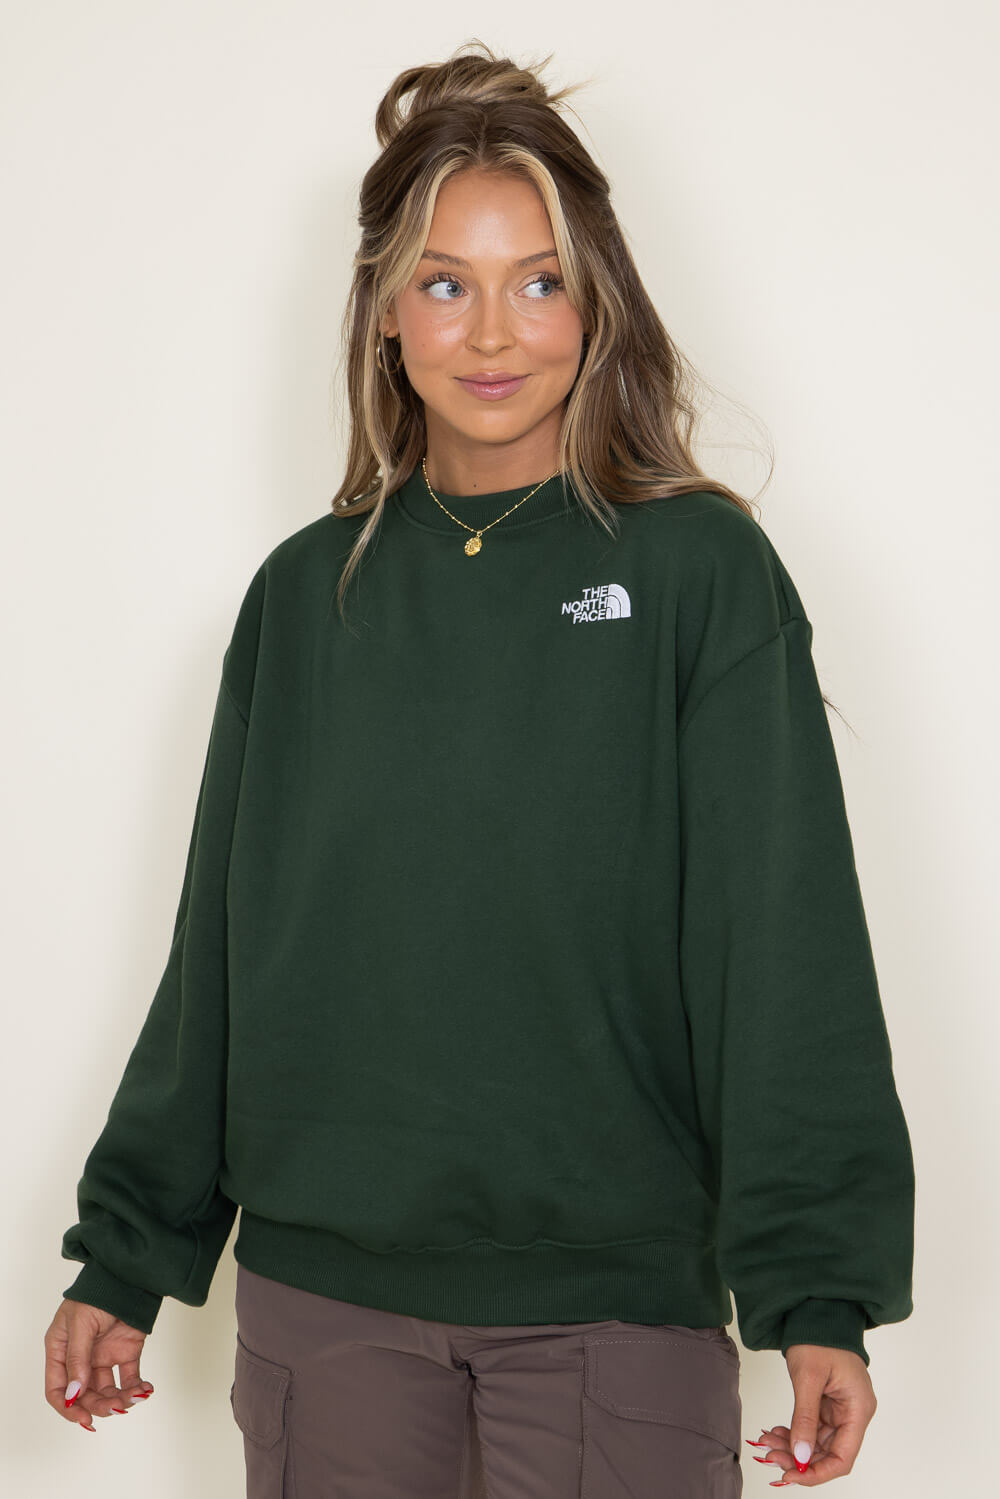 The North Face Evolution Oversized Crew Sweatshirt for Women in